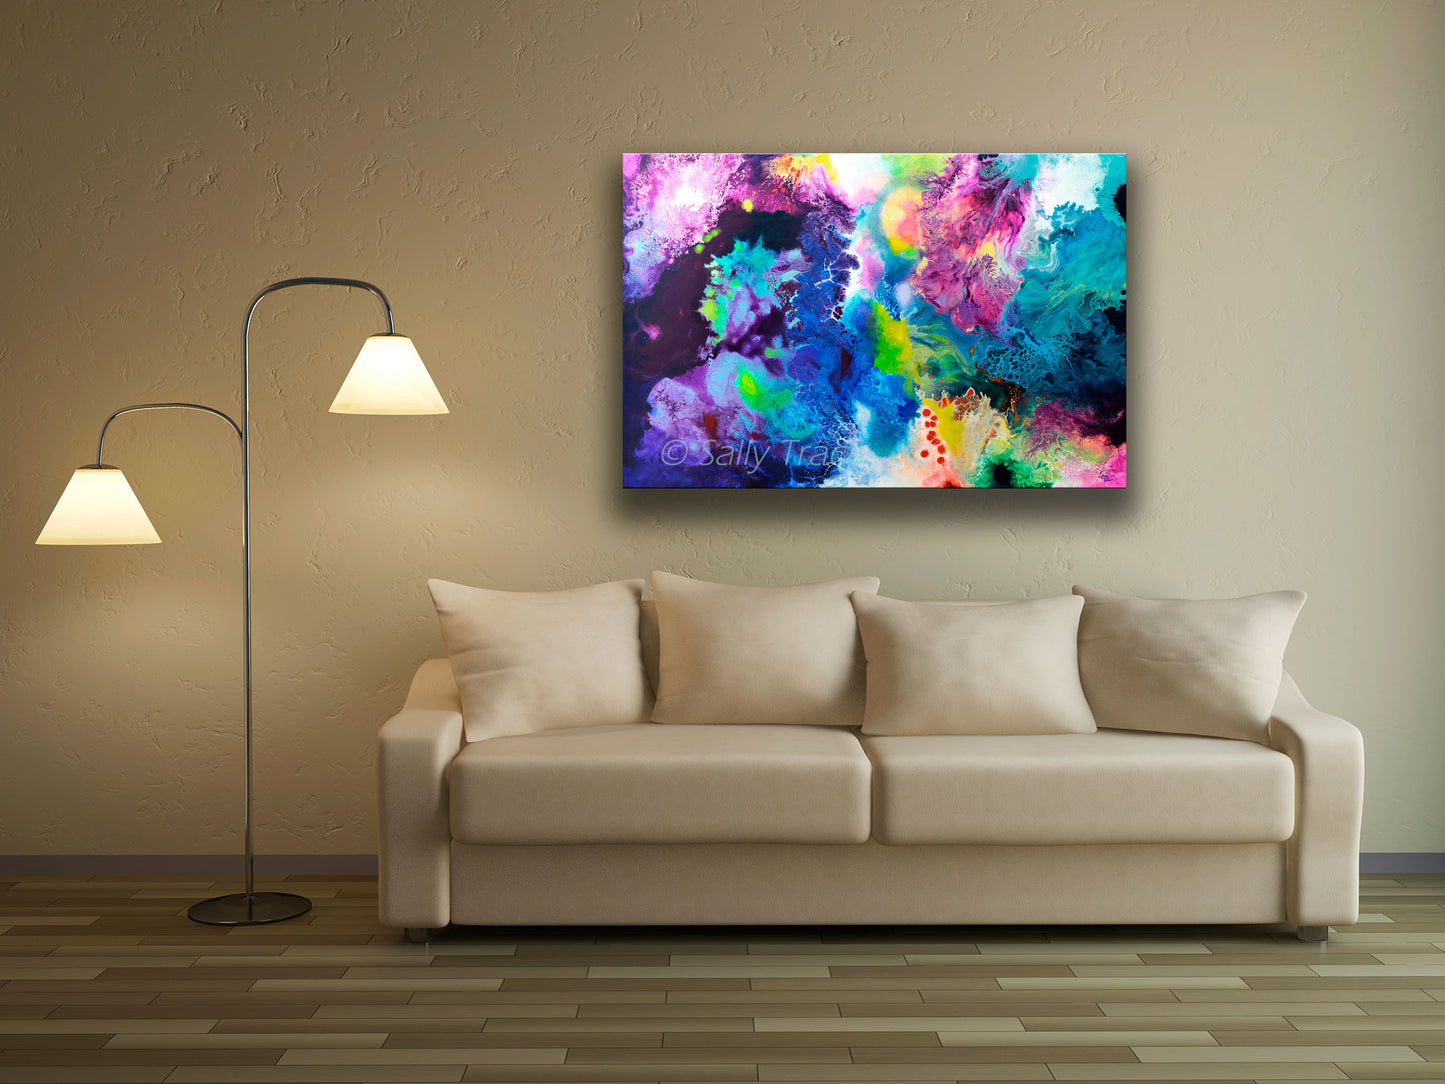 New Life, abstract art painting prints on sale from Sally Trace, room view